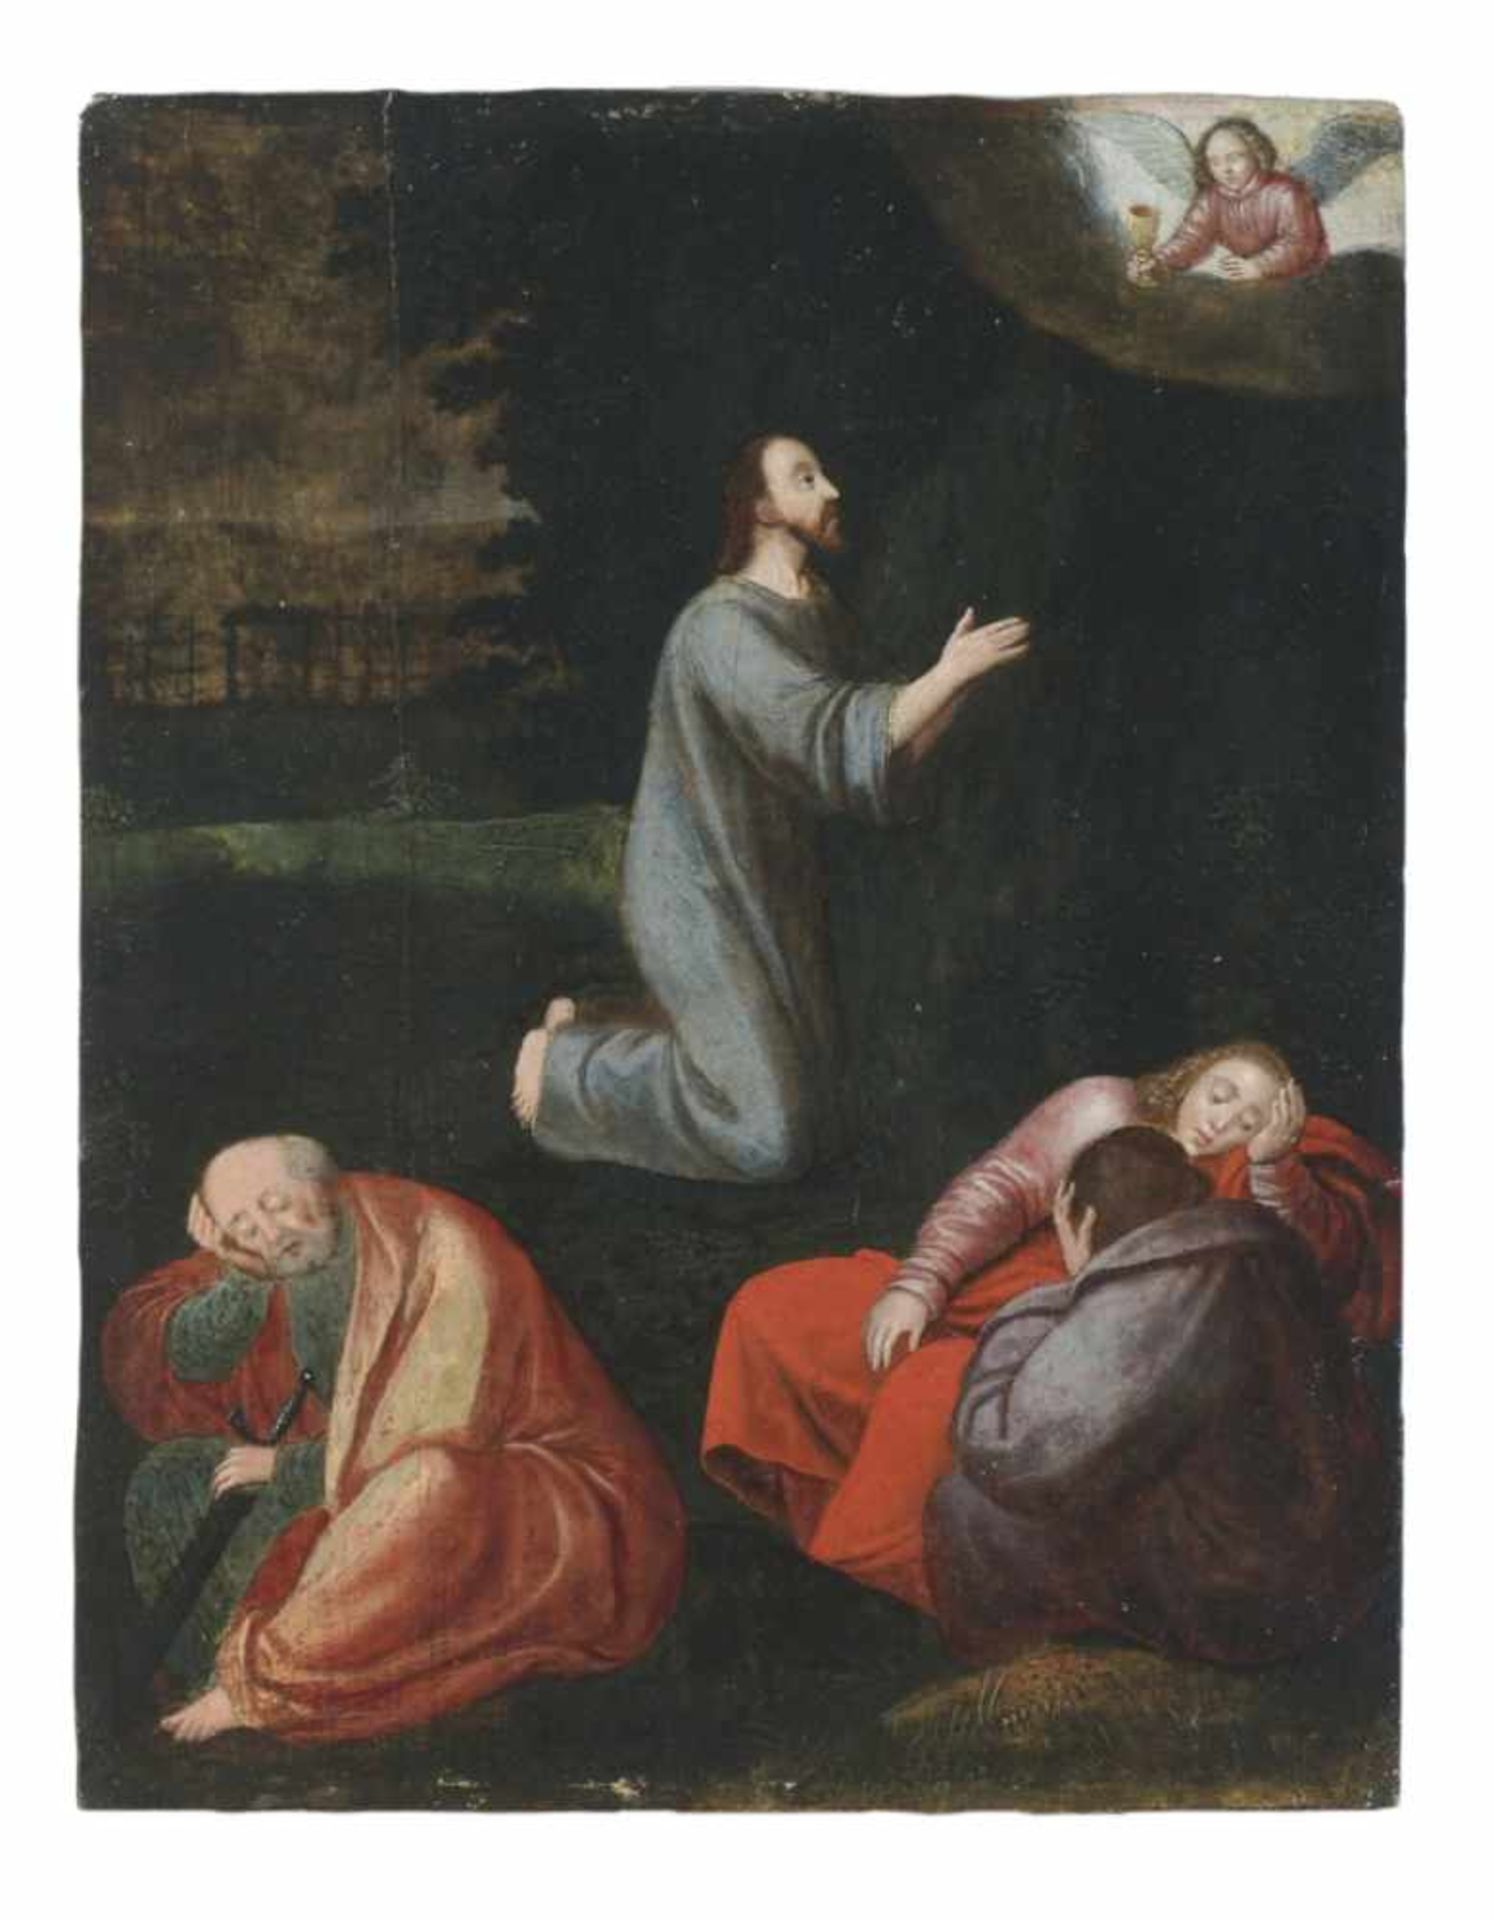 Unknown Master, Christ on the Mount of Olives, Oil on panel, probably 16th c., 26,5 x 20,5